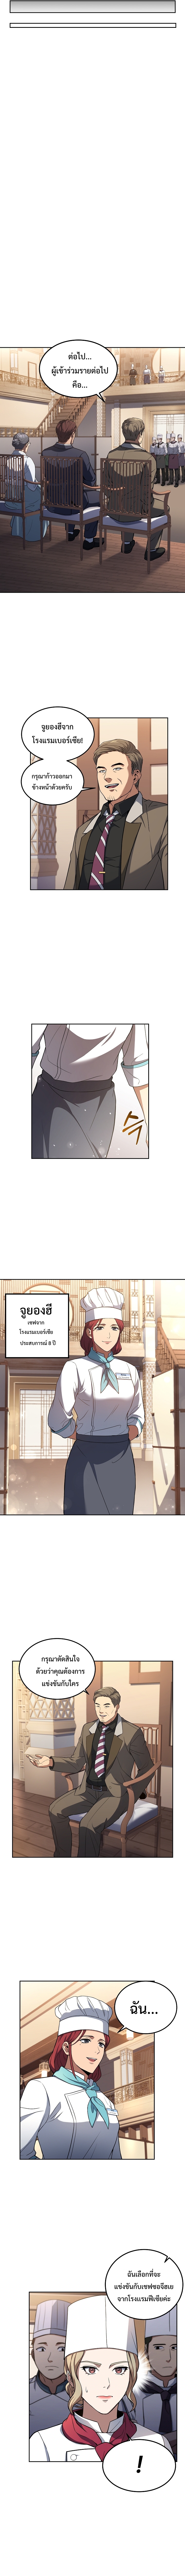 Youngest Chef From the 3rd Rate Hotel 30 (3)